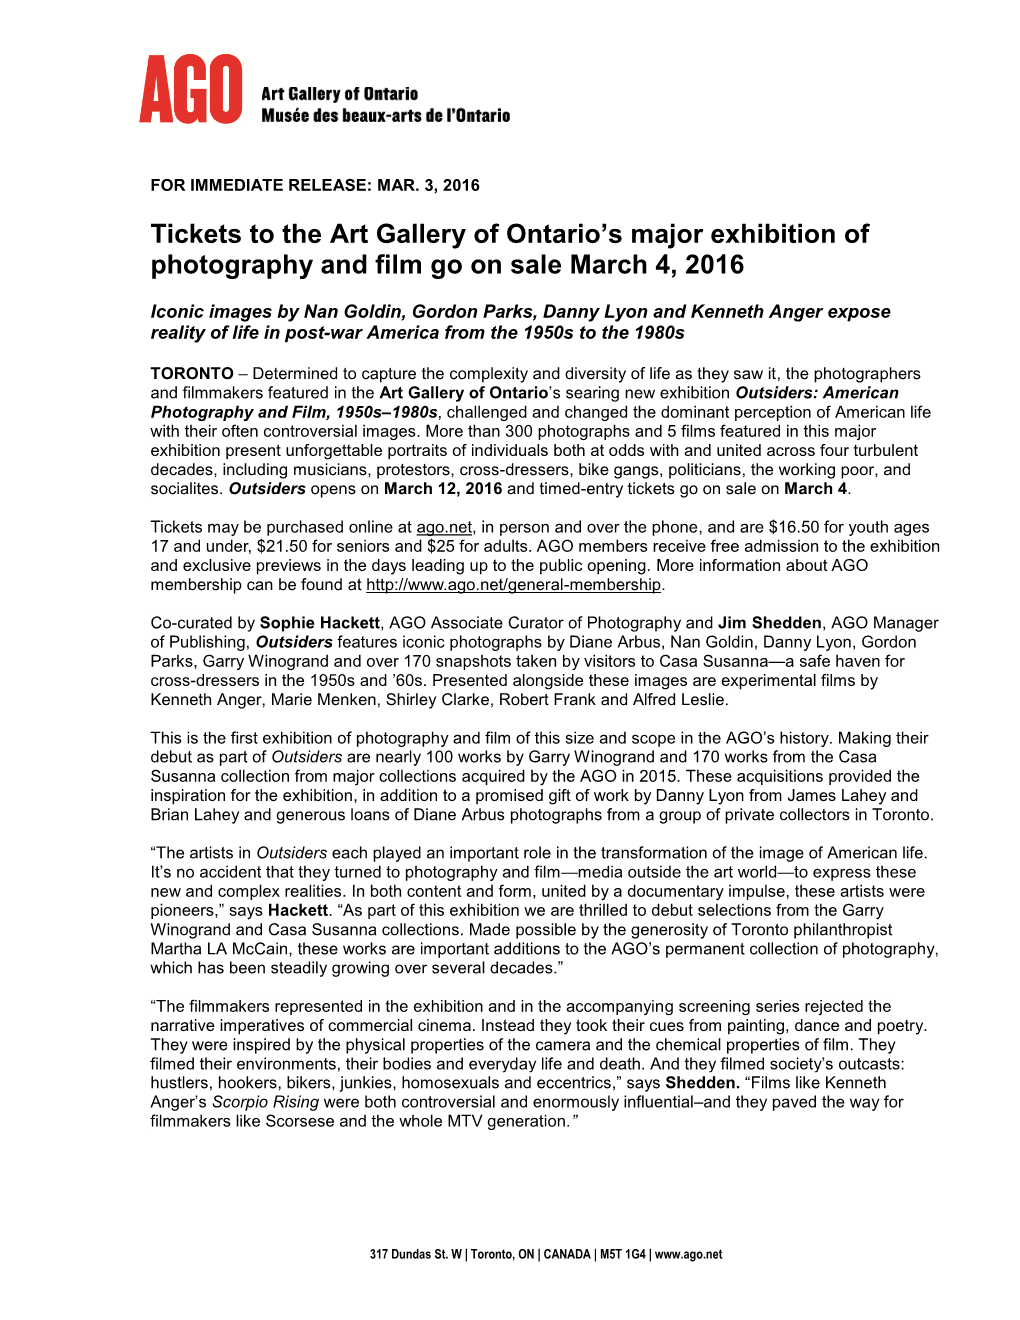 Tickets to the Art Gallery of Ontario's